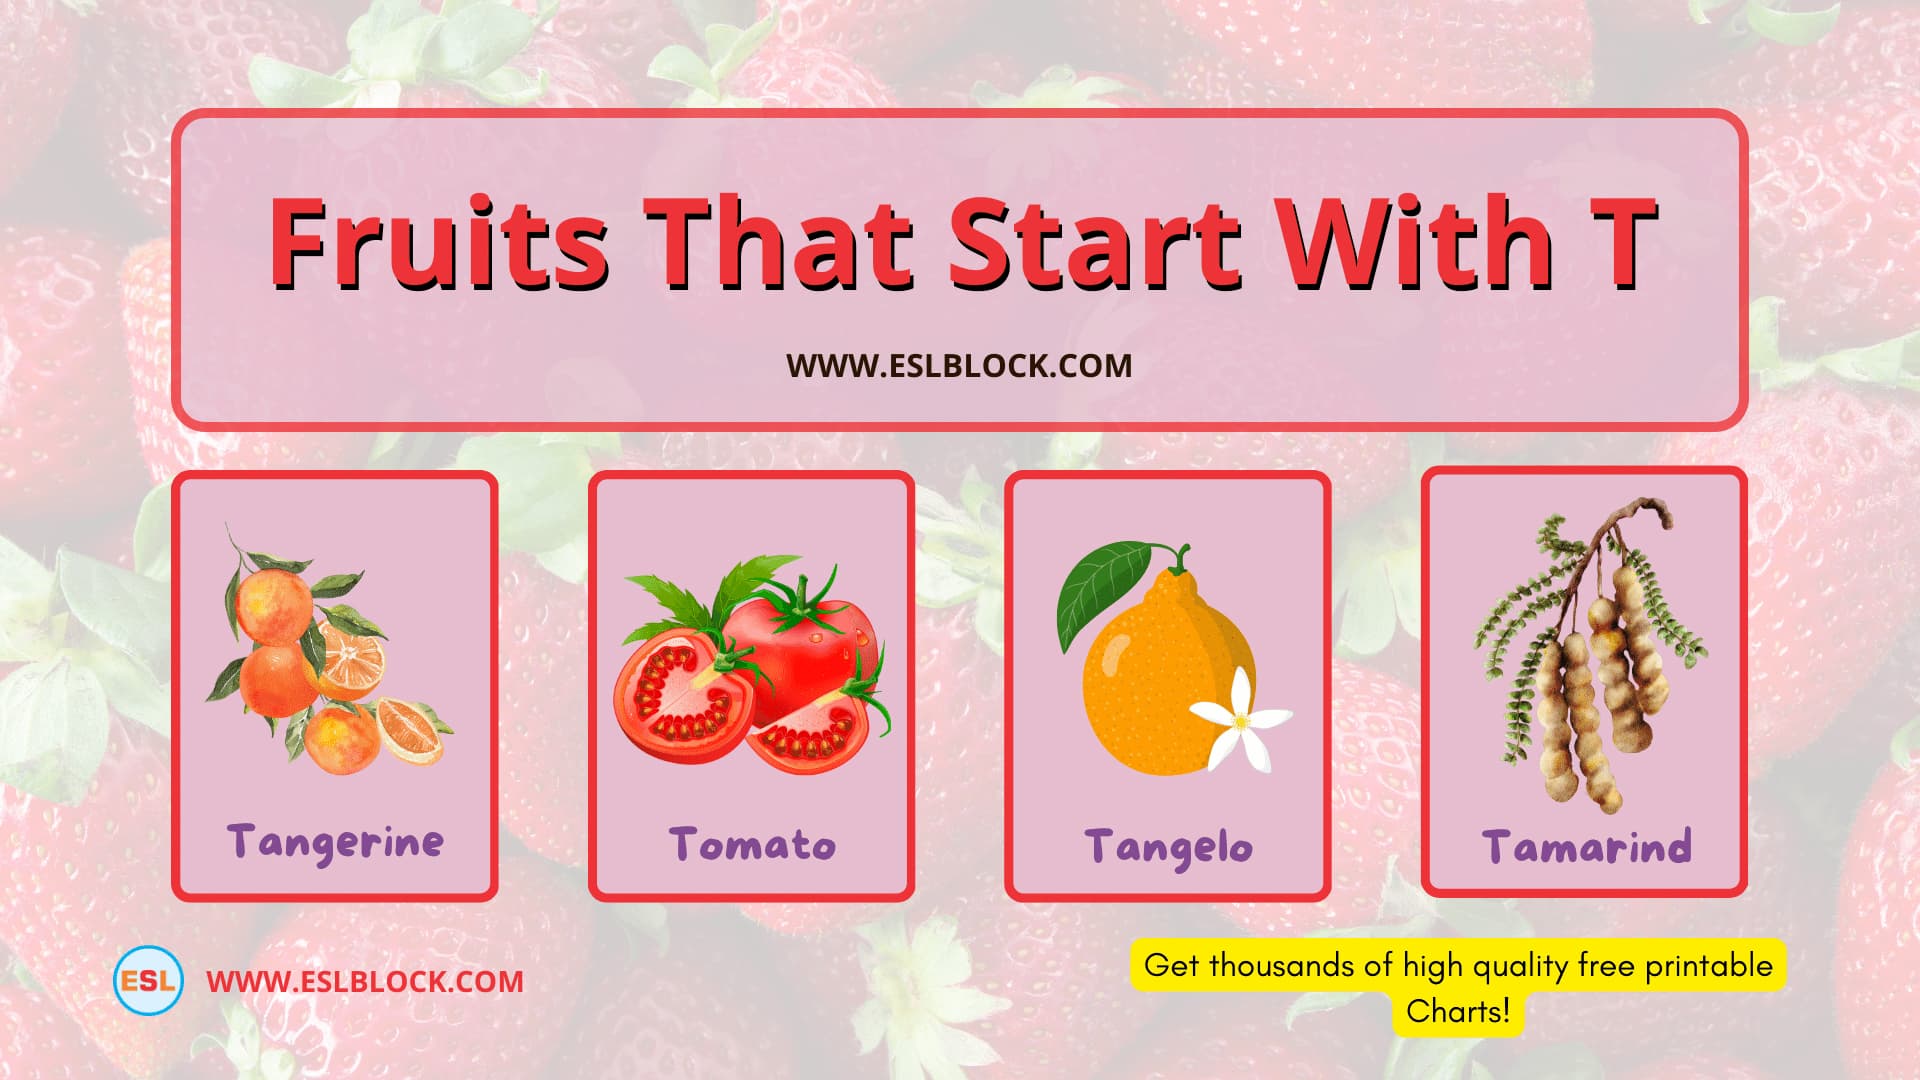 In this article, I will be providing you a list of fruits that start with T in the English language vocabulary.